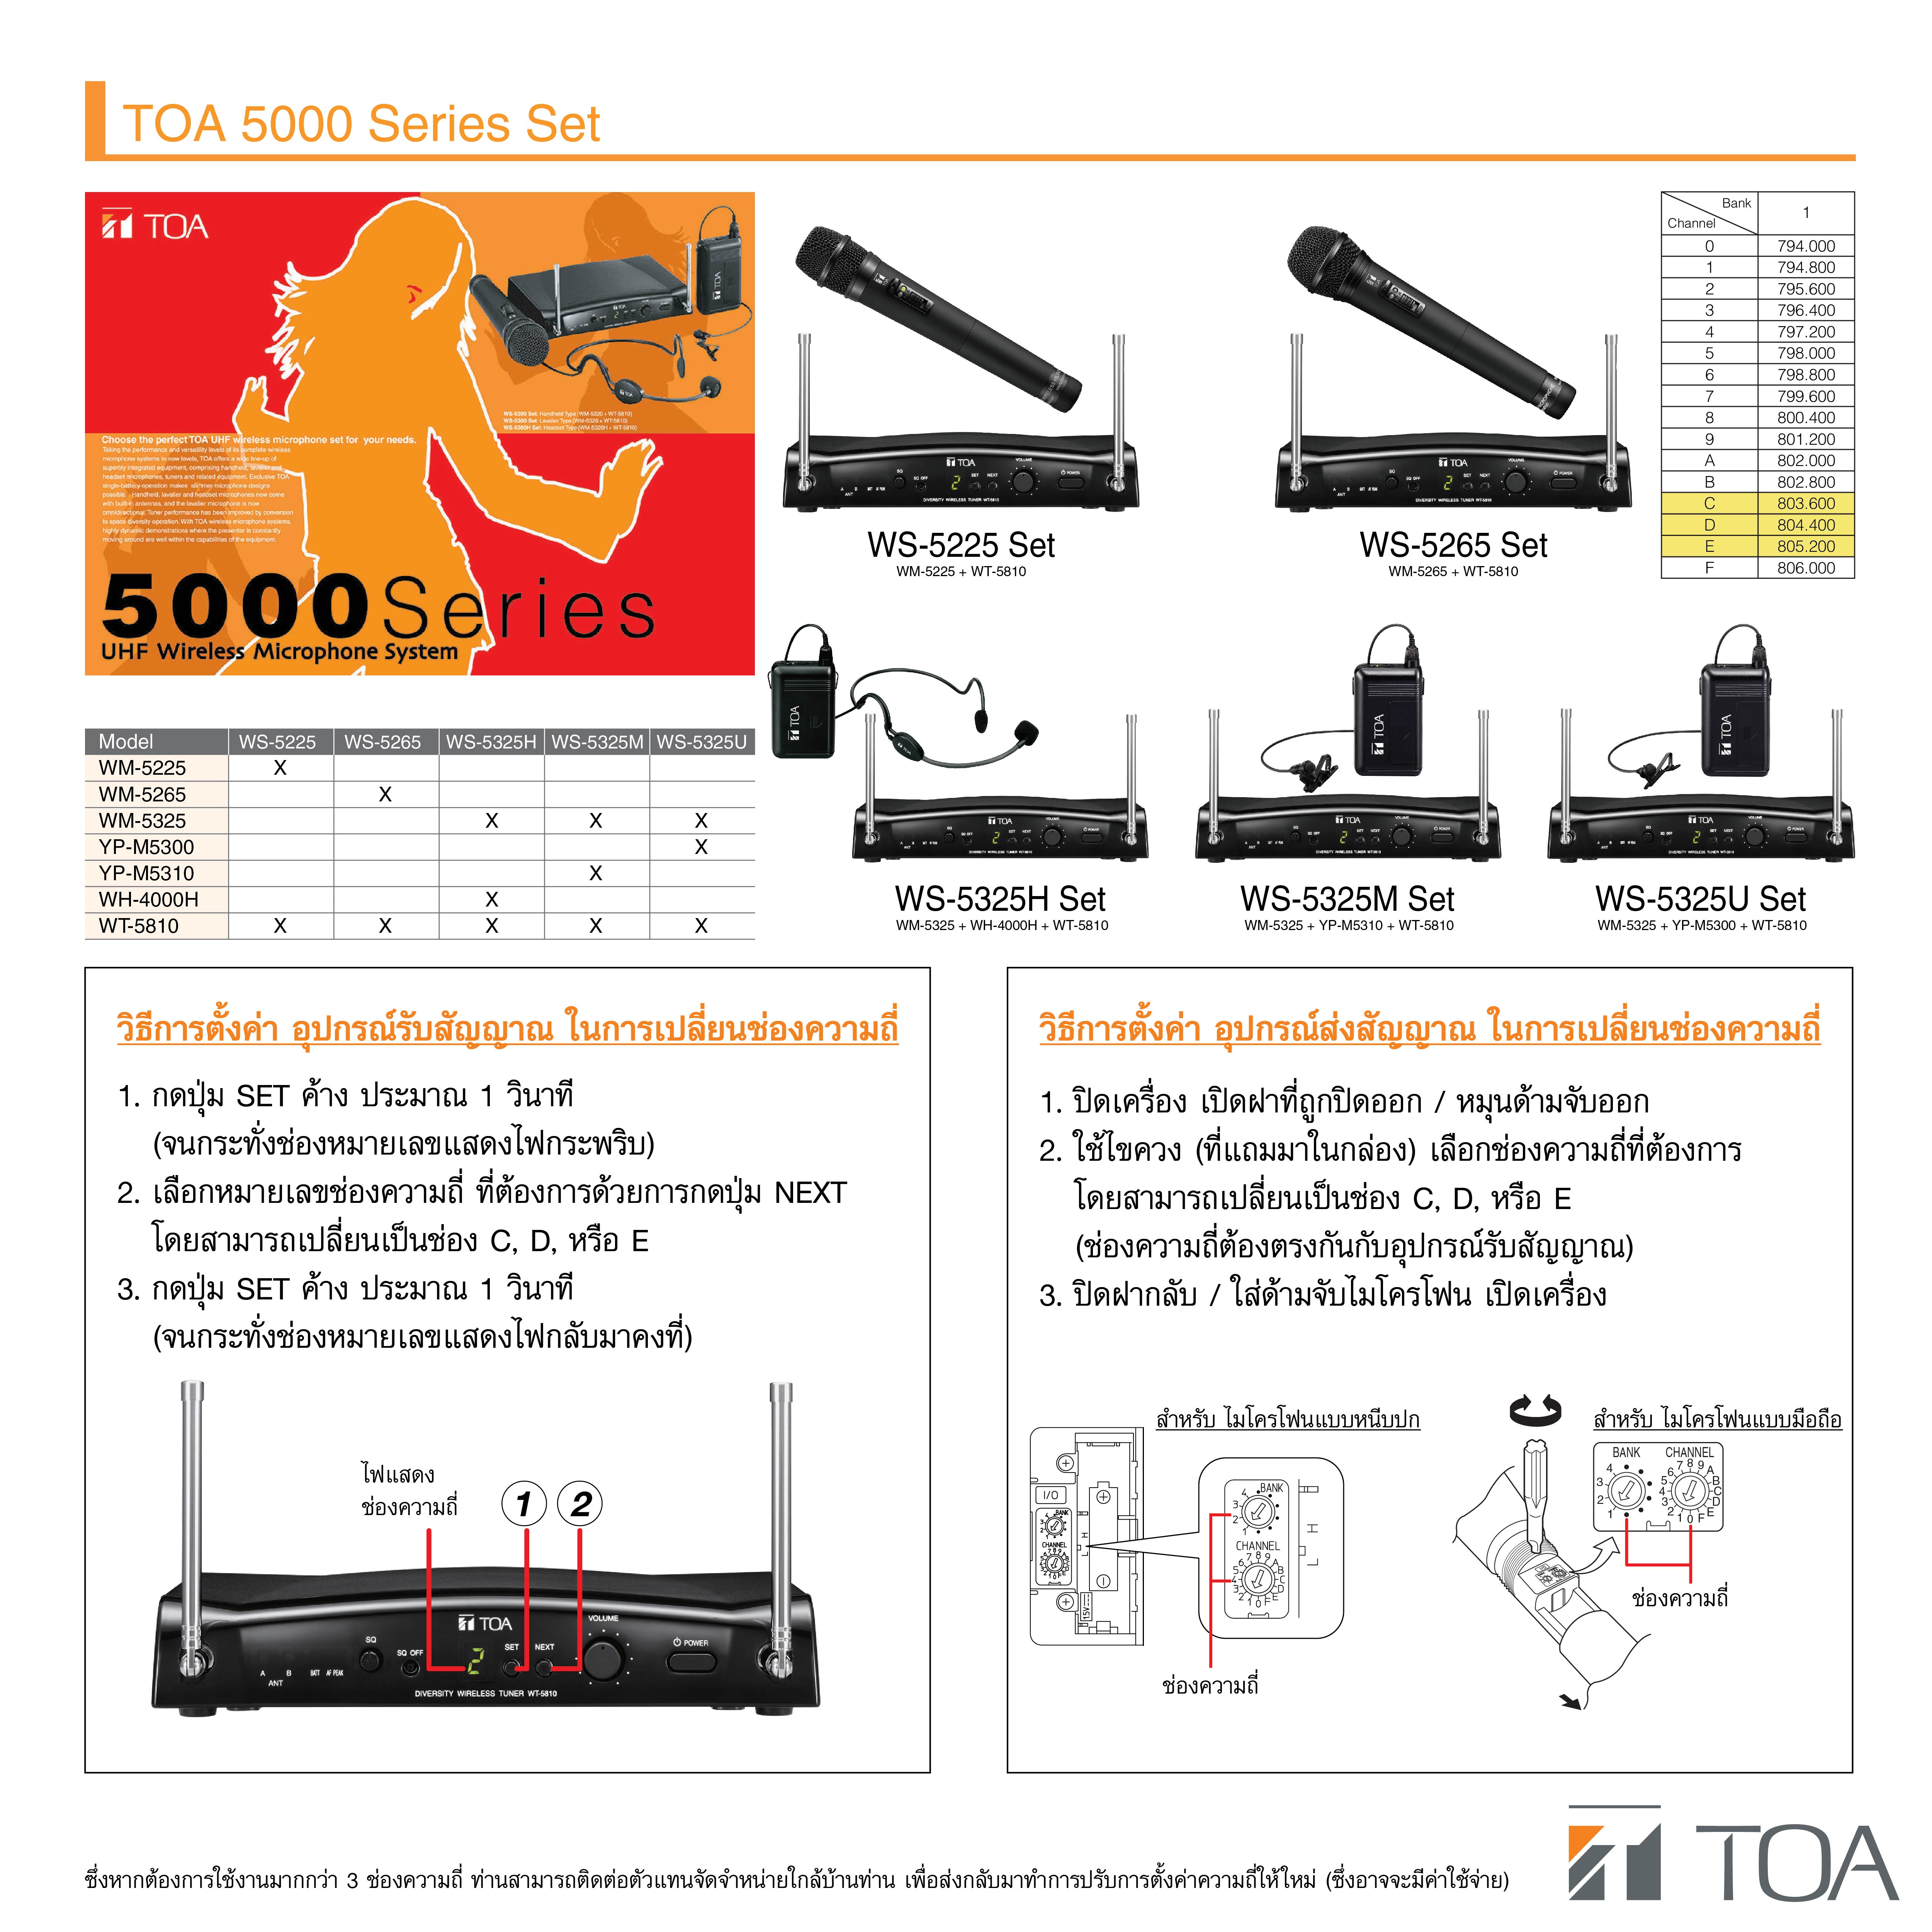 How to select a frequency in old TOA model of wireless microphone